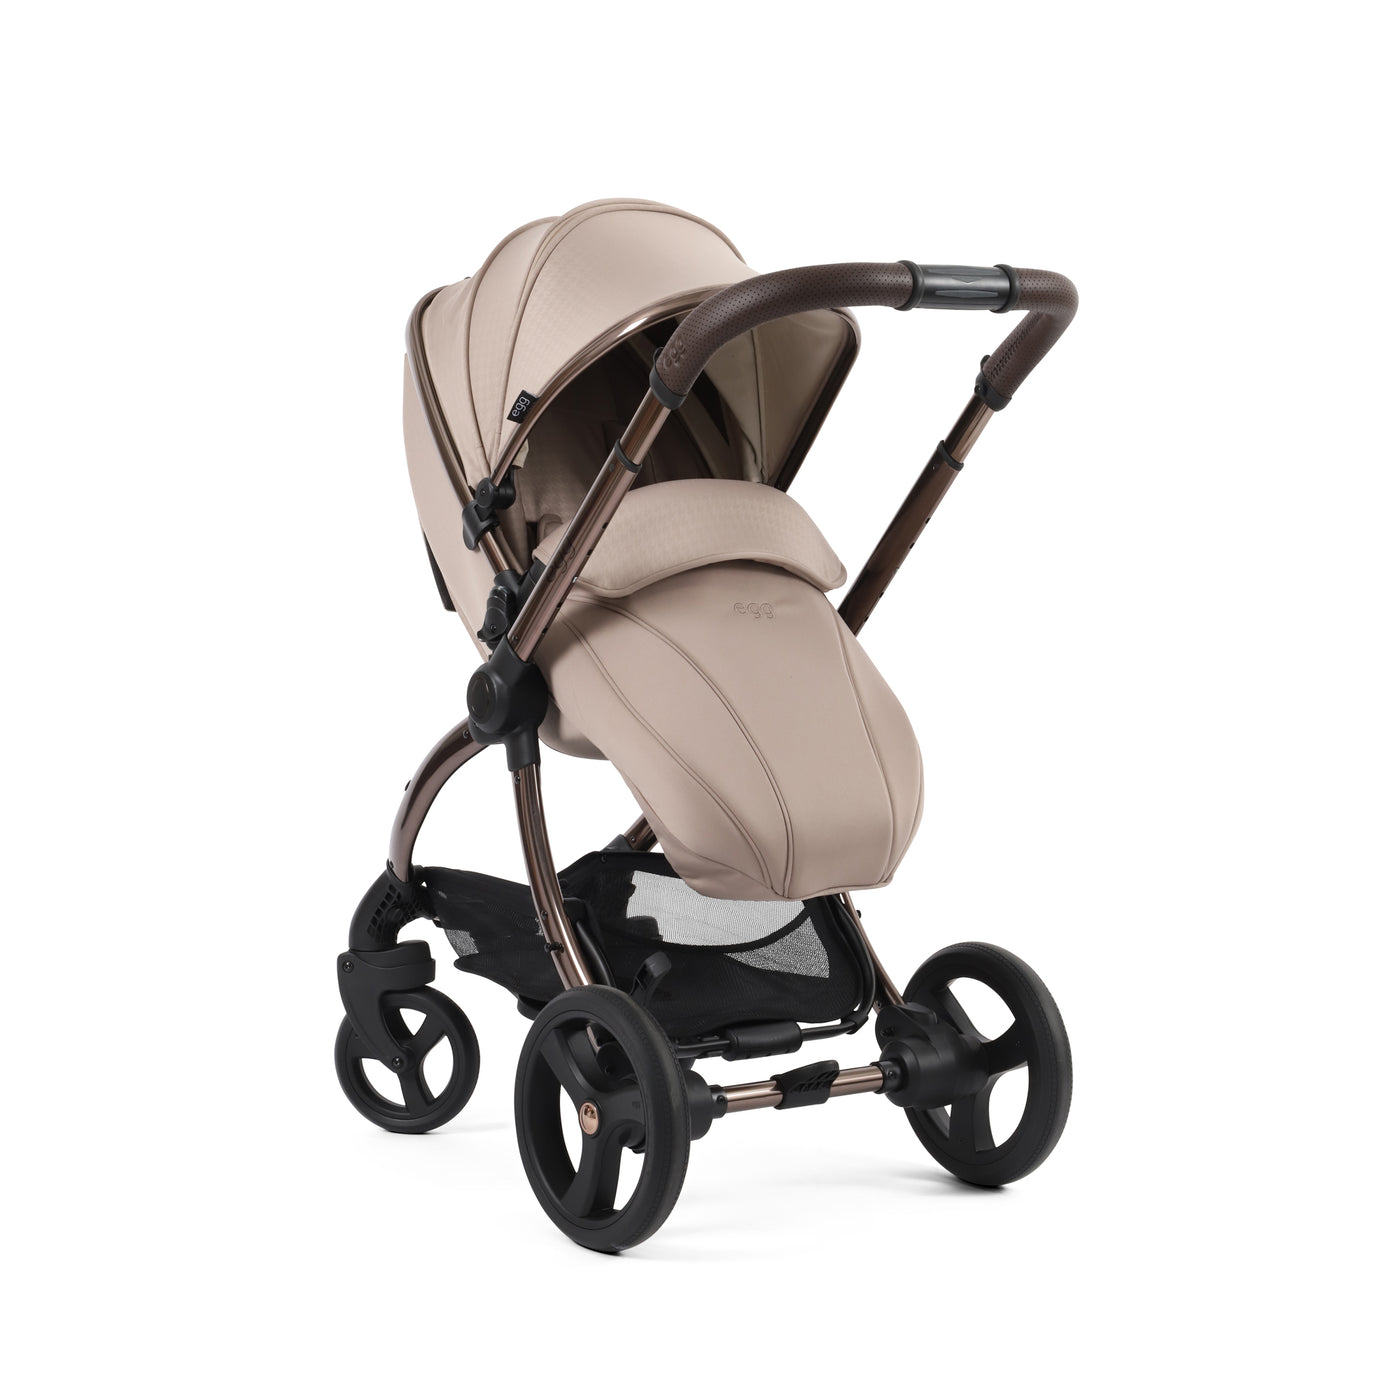 egg3 Stroller - Special Edition Houndstooth Almond